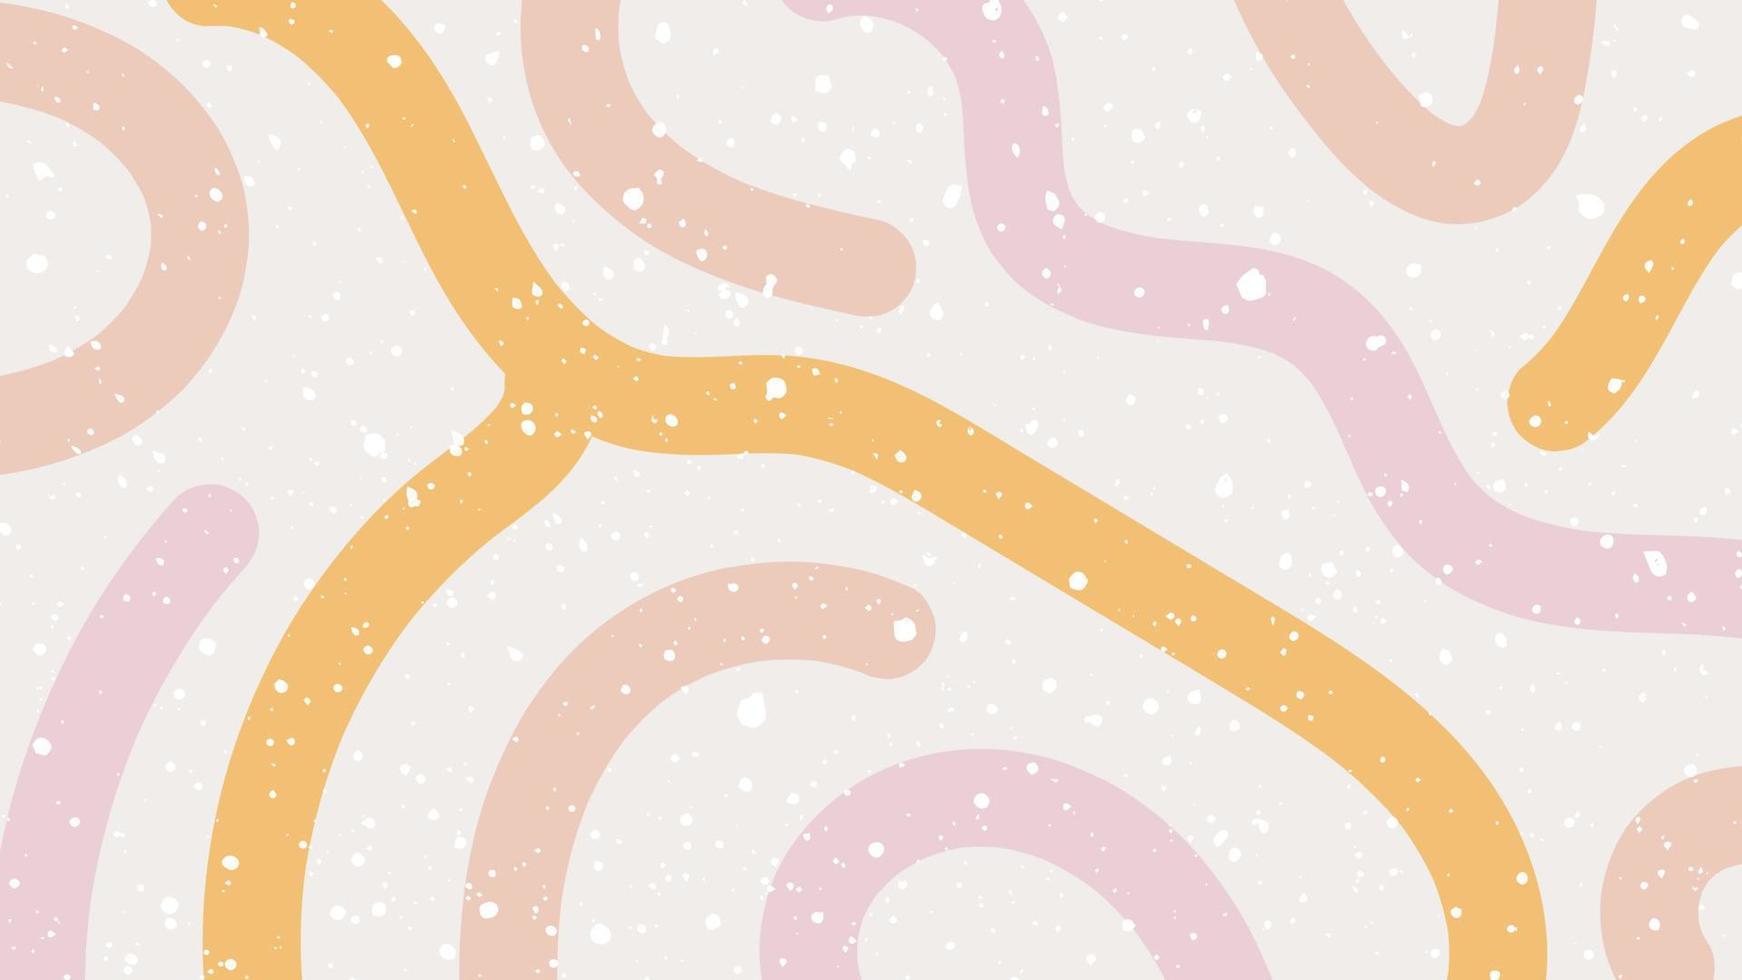 Curved stripes cute abstract pattern on beige background. Lines and dots in pink, yellow, peach colors. Hand drawn vector texture backdrop. Childish doodle scribble banner template